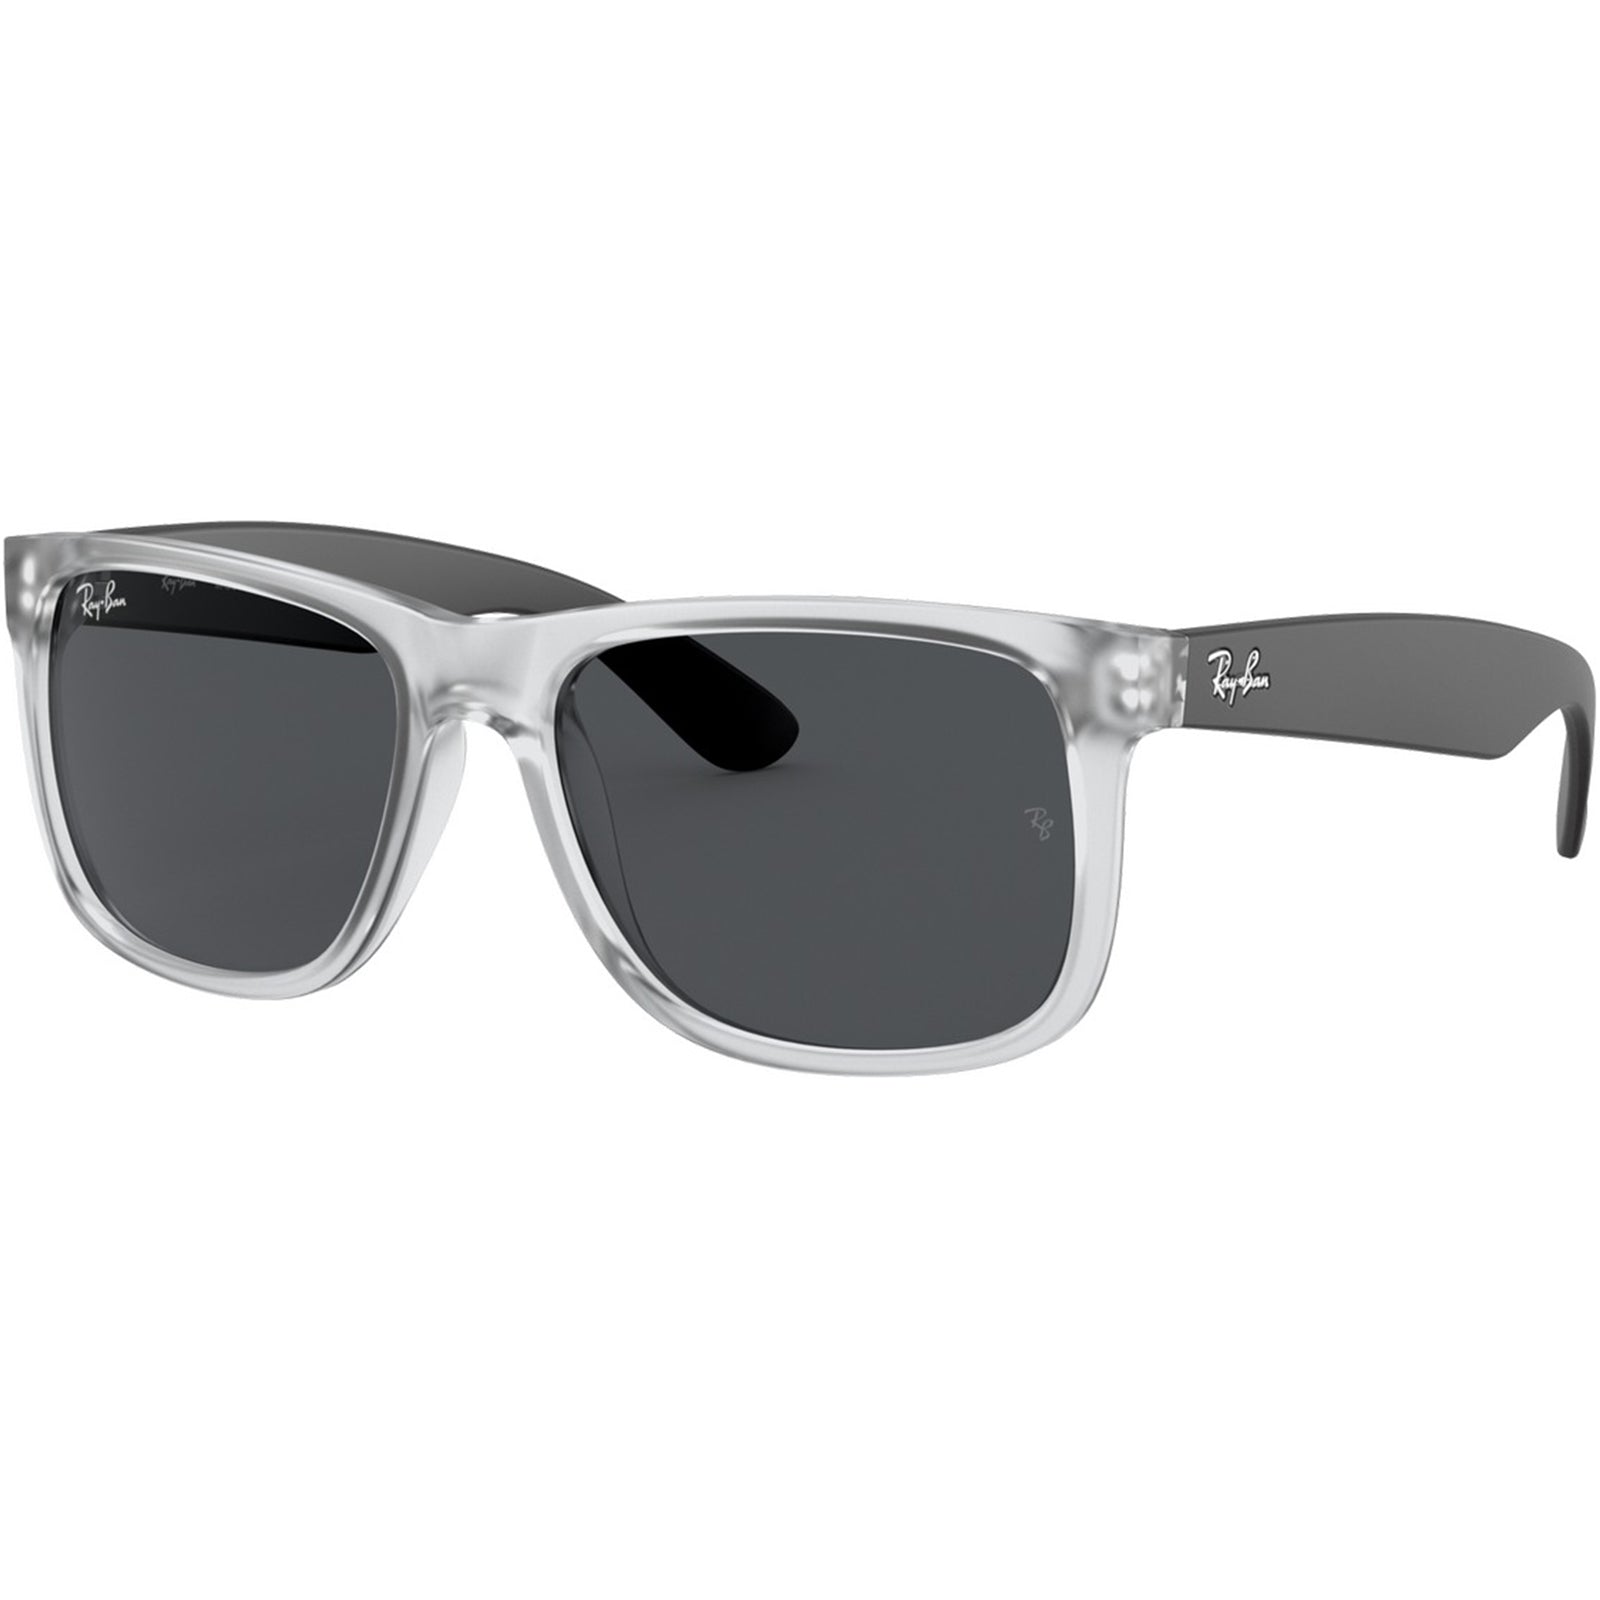 Ray-Ban Justin Color Mix Men's Lifestyle Sunglasses-0RB4165